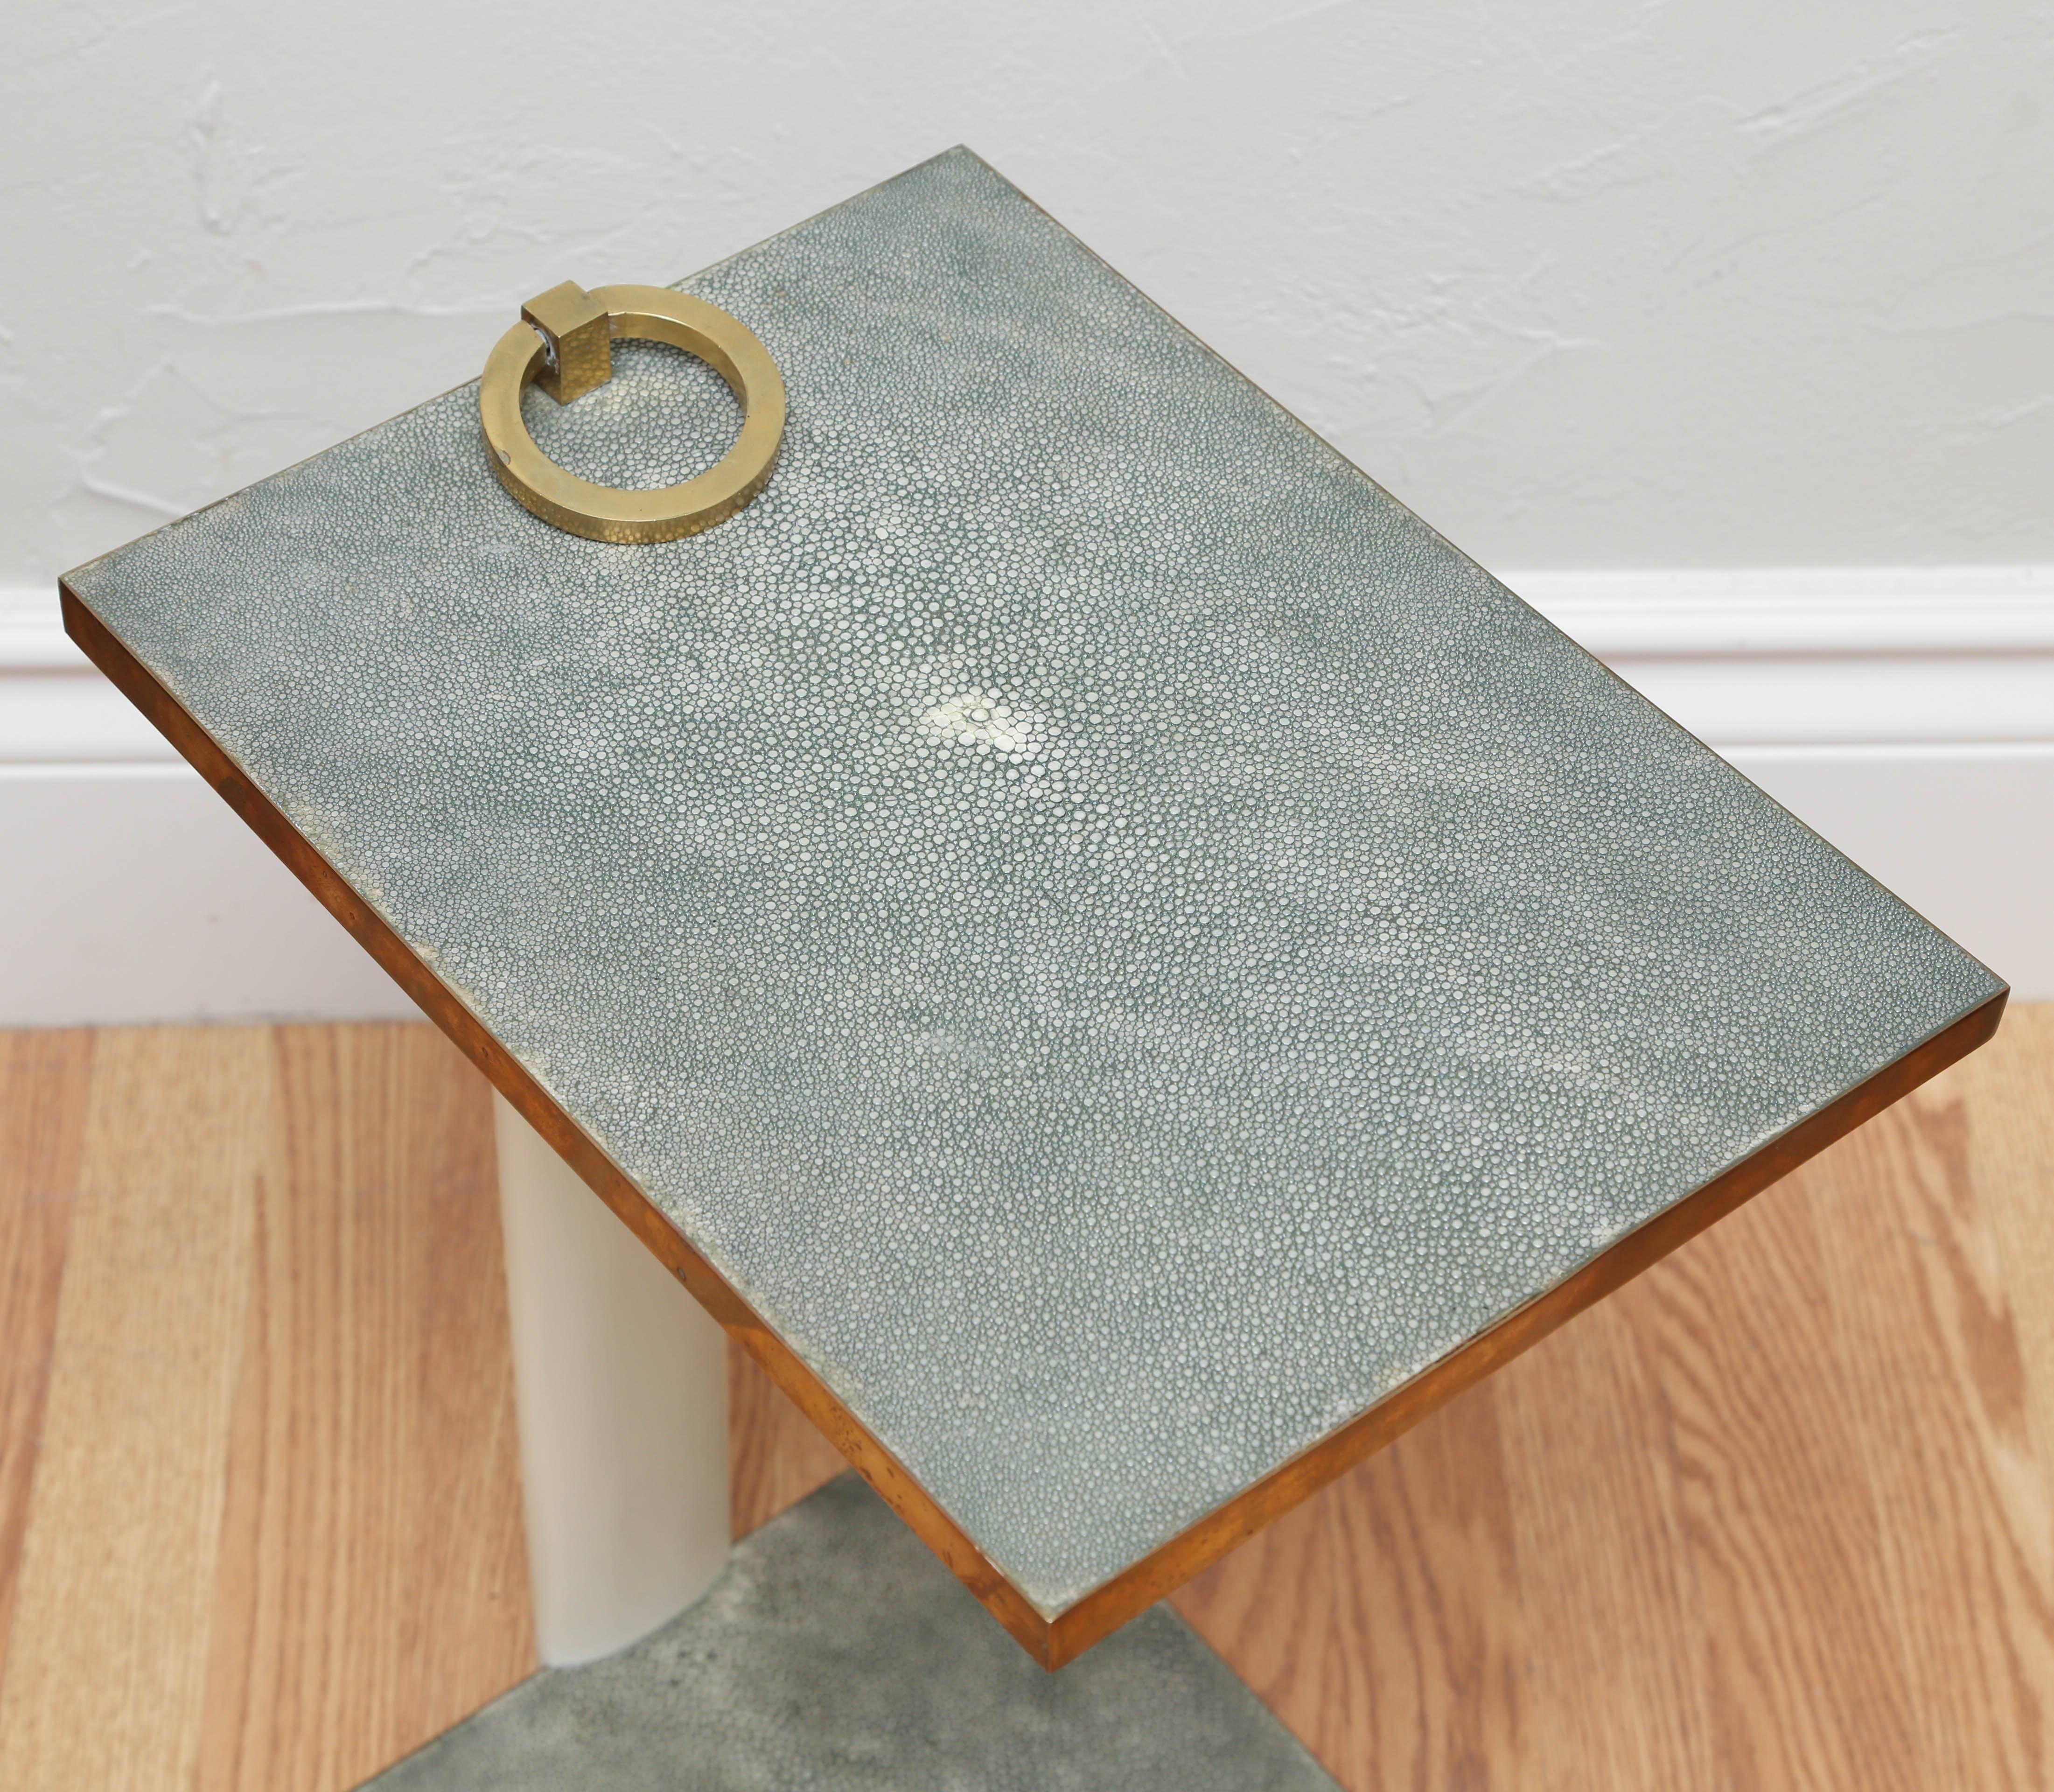 Stunning side table with shagreen base and top. Finished with brass surrounds and large solid brass ring at top.